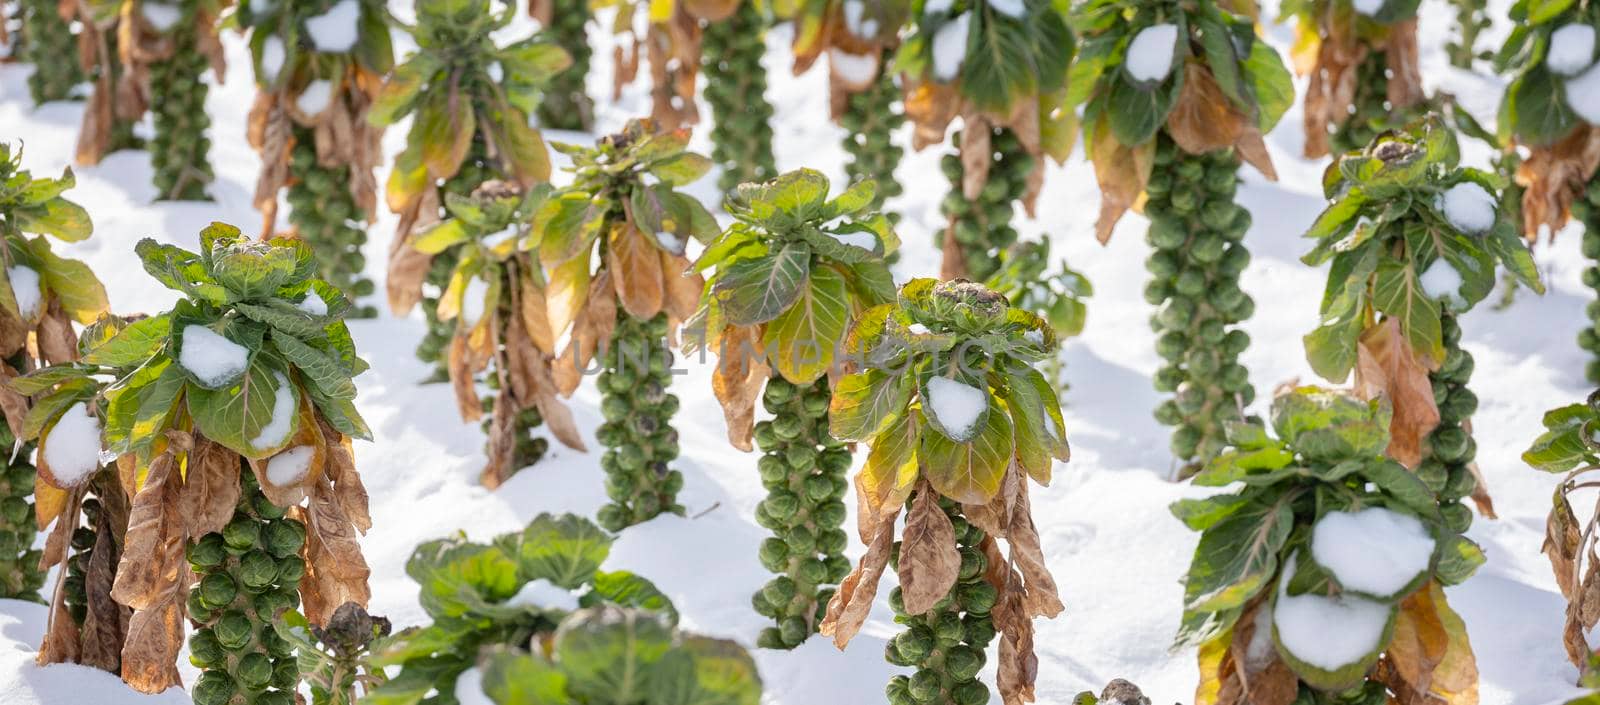 brussels sprouts in winter field with snow by ahavelaar